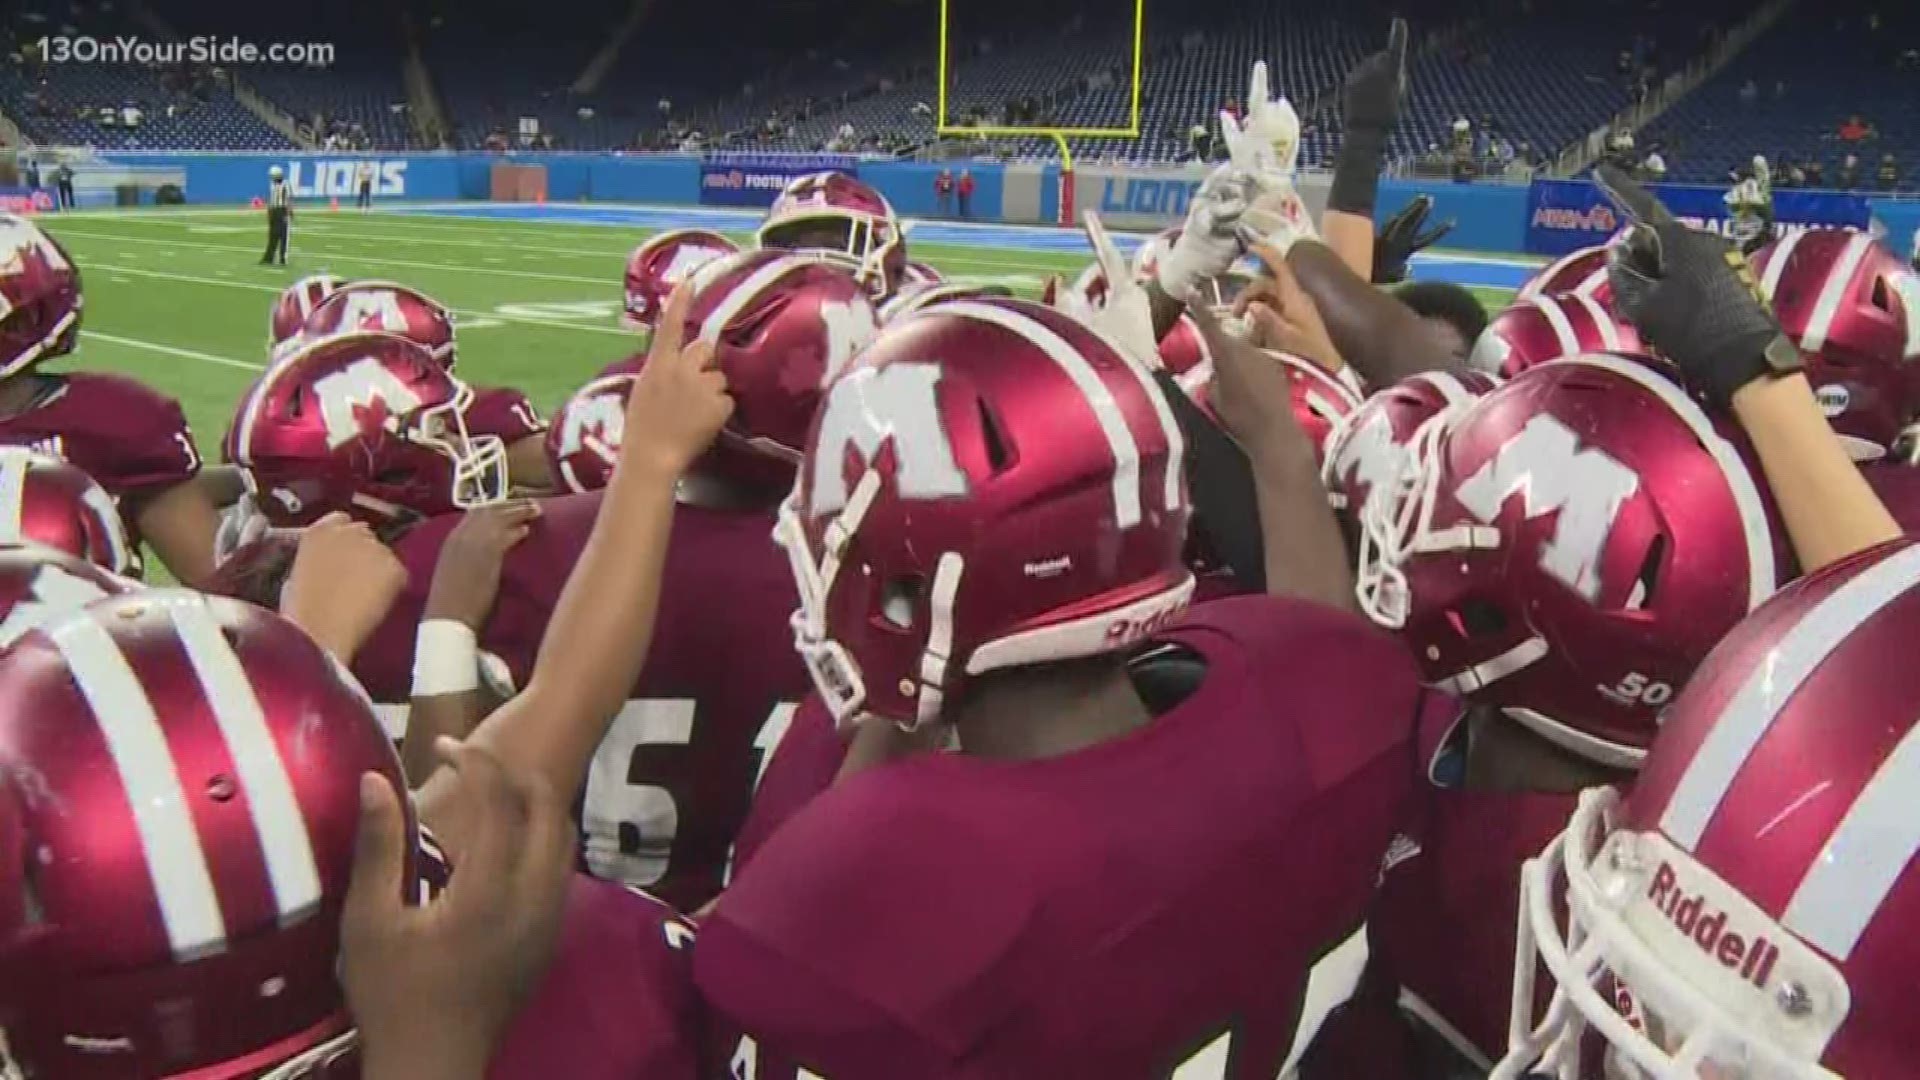 The Big Reds were trying to get their 7th state title. But they fell to River Rouge, 30-7.